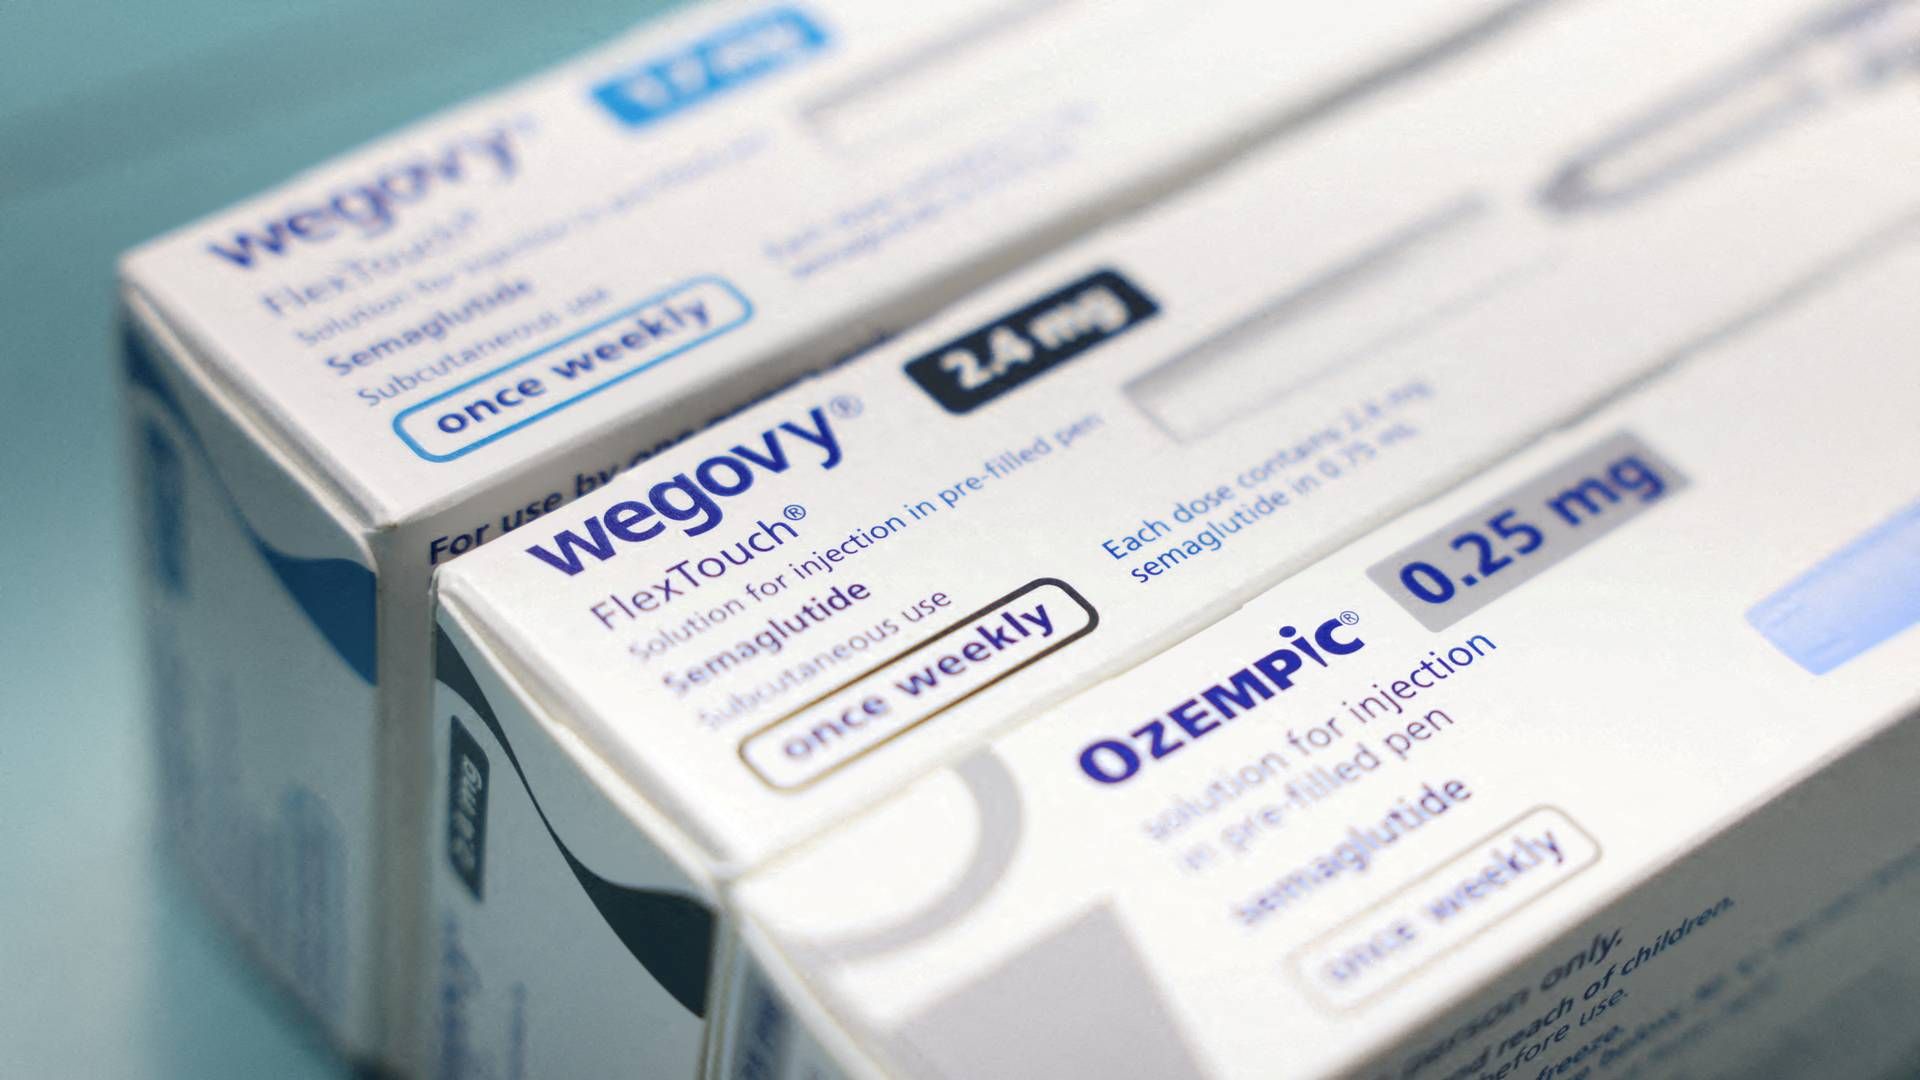 The price of obesity drugs like Wegovy should be set so that patients with the necessary medical need have access to it, according to a former top scientist at the company - just as the industry has worked to do with insulin. | Photo: Hollie Adams